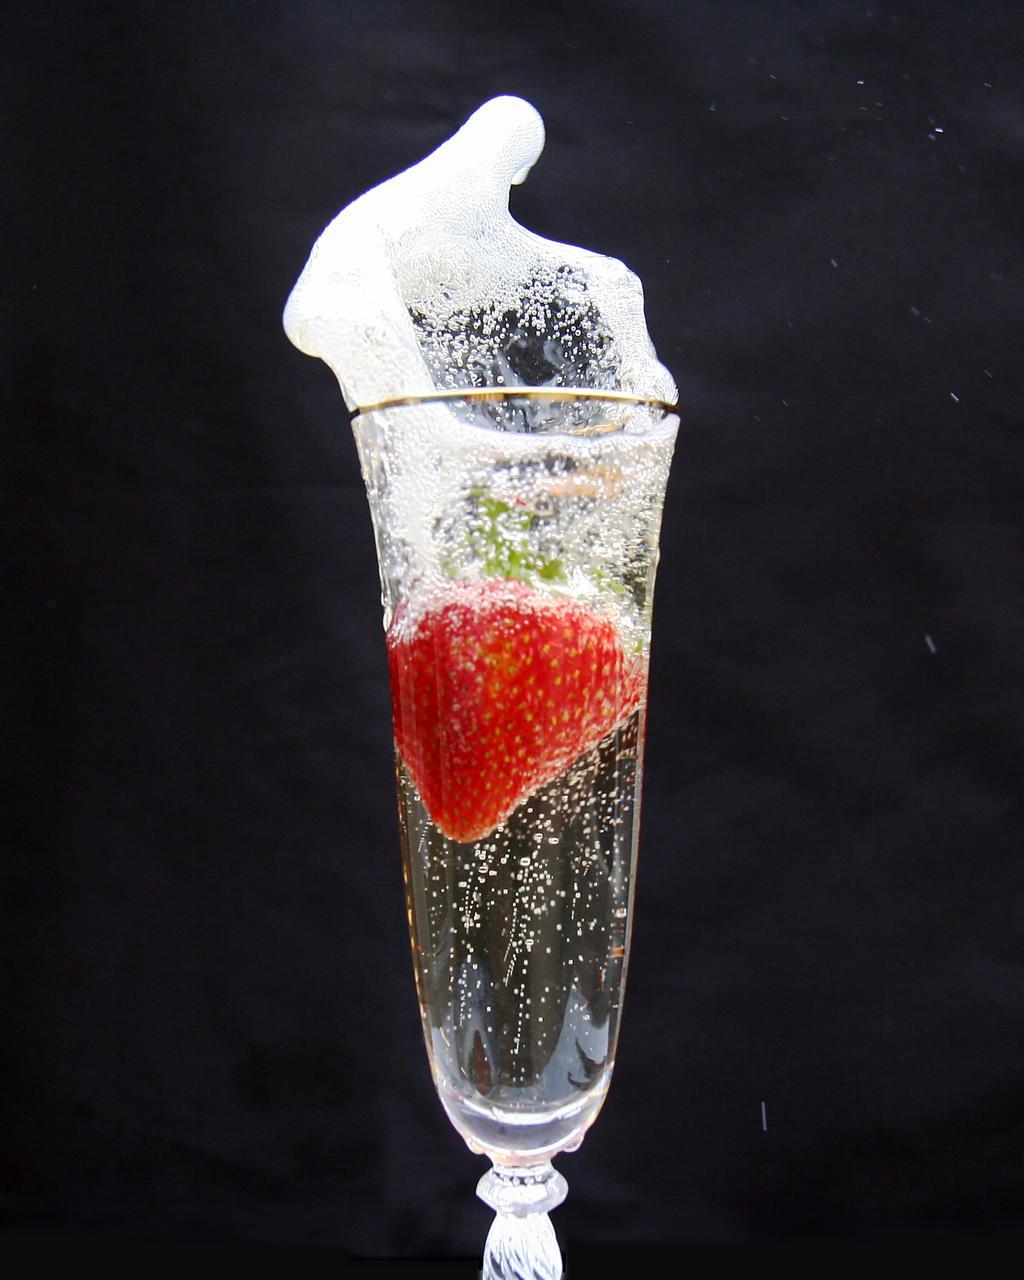 File:Strawberry and champagne.jpg - Wikimedia Commons